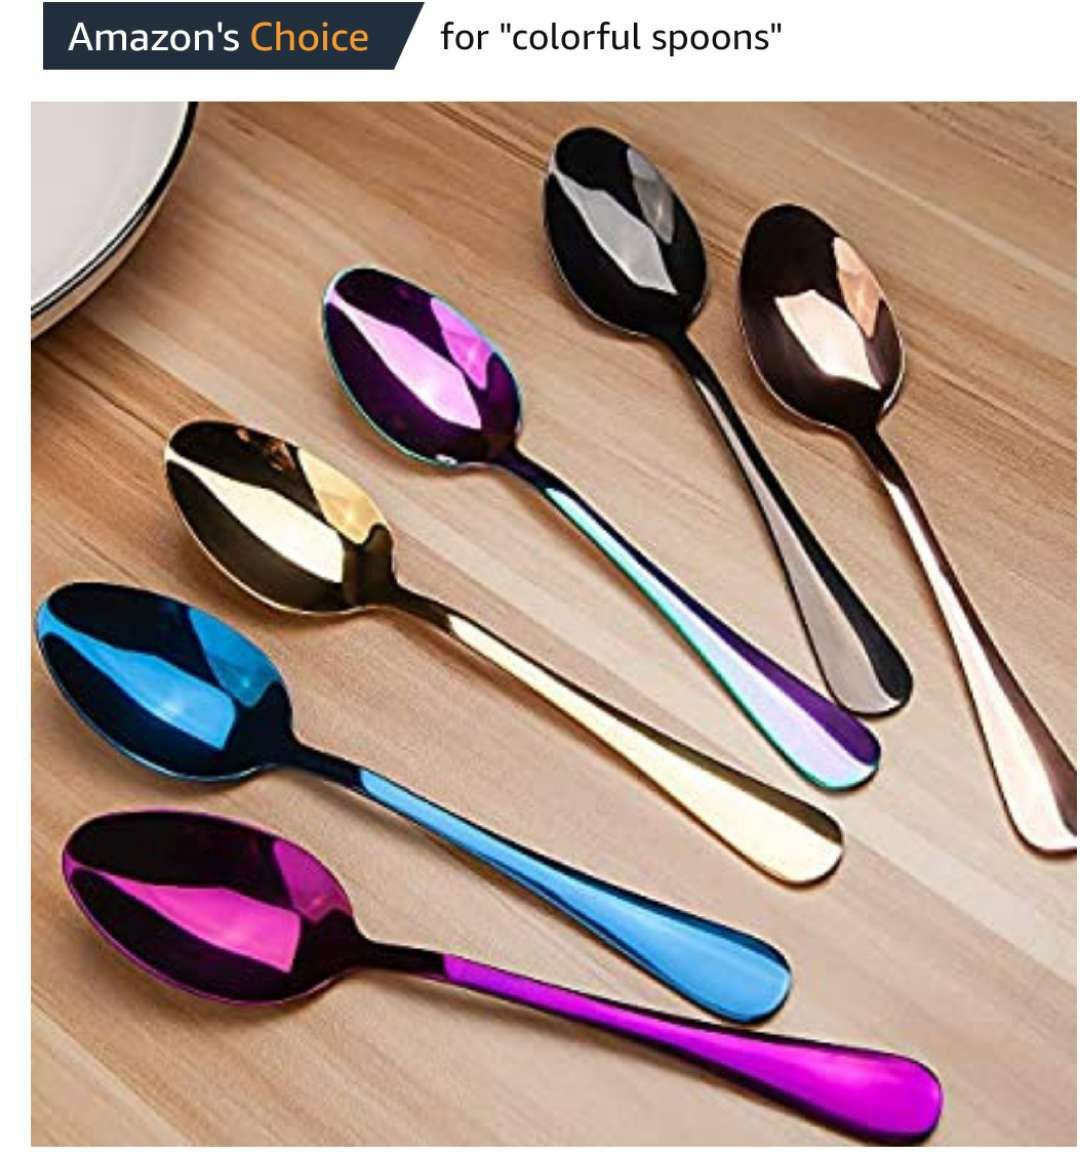 Brand new sealed 6-pieces Dinner Spoons Set, Stainless Steel Soup Spoons Rainbow Silverware